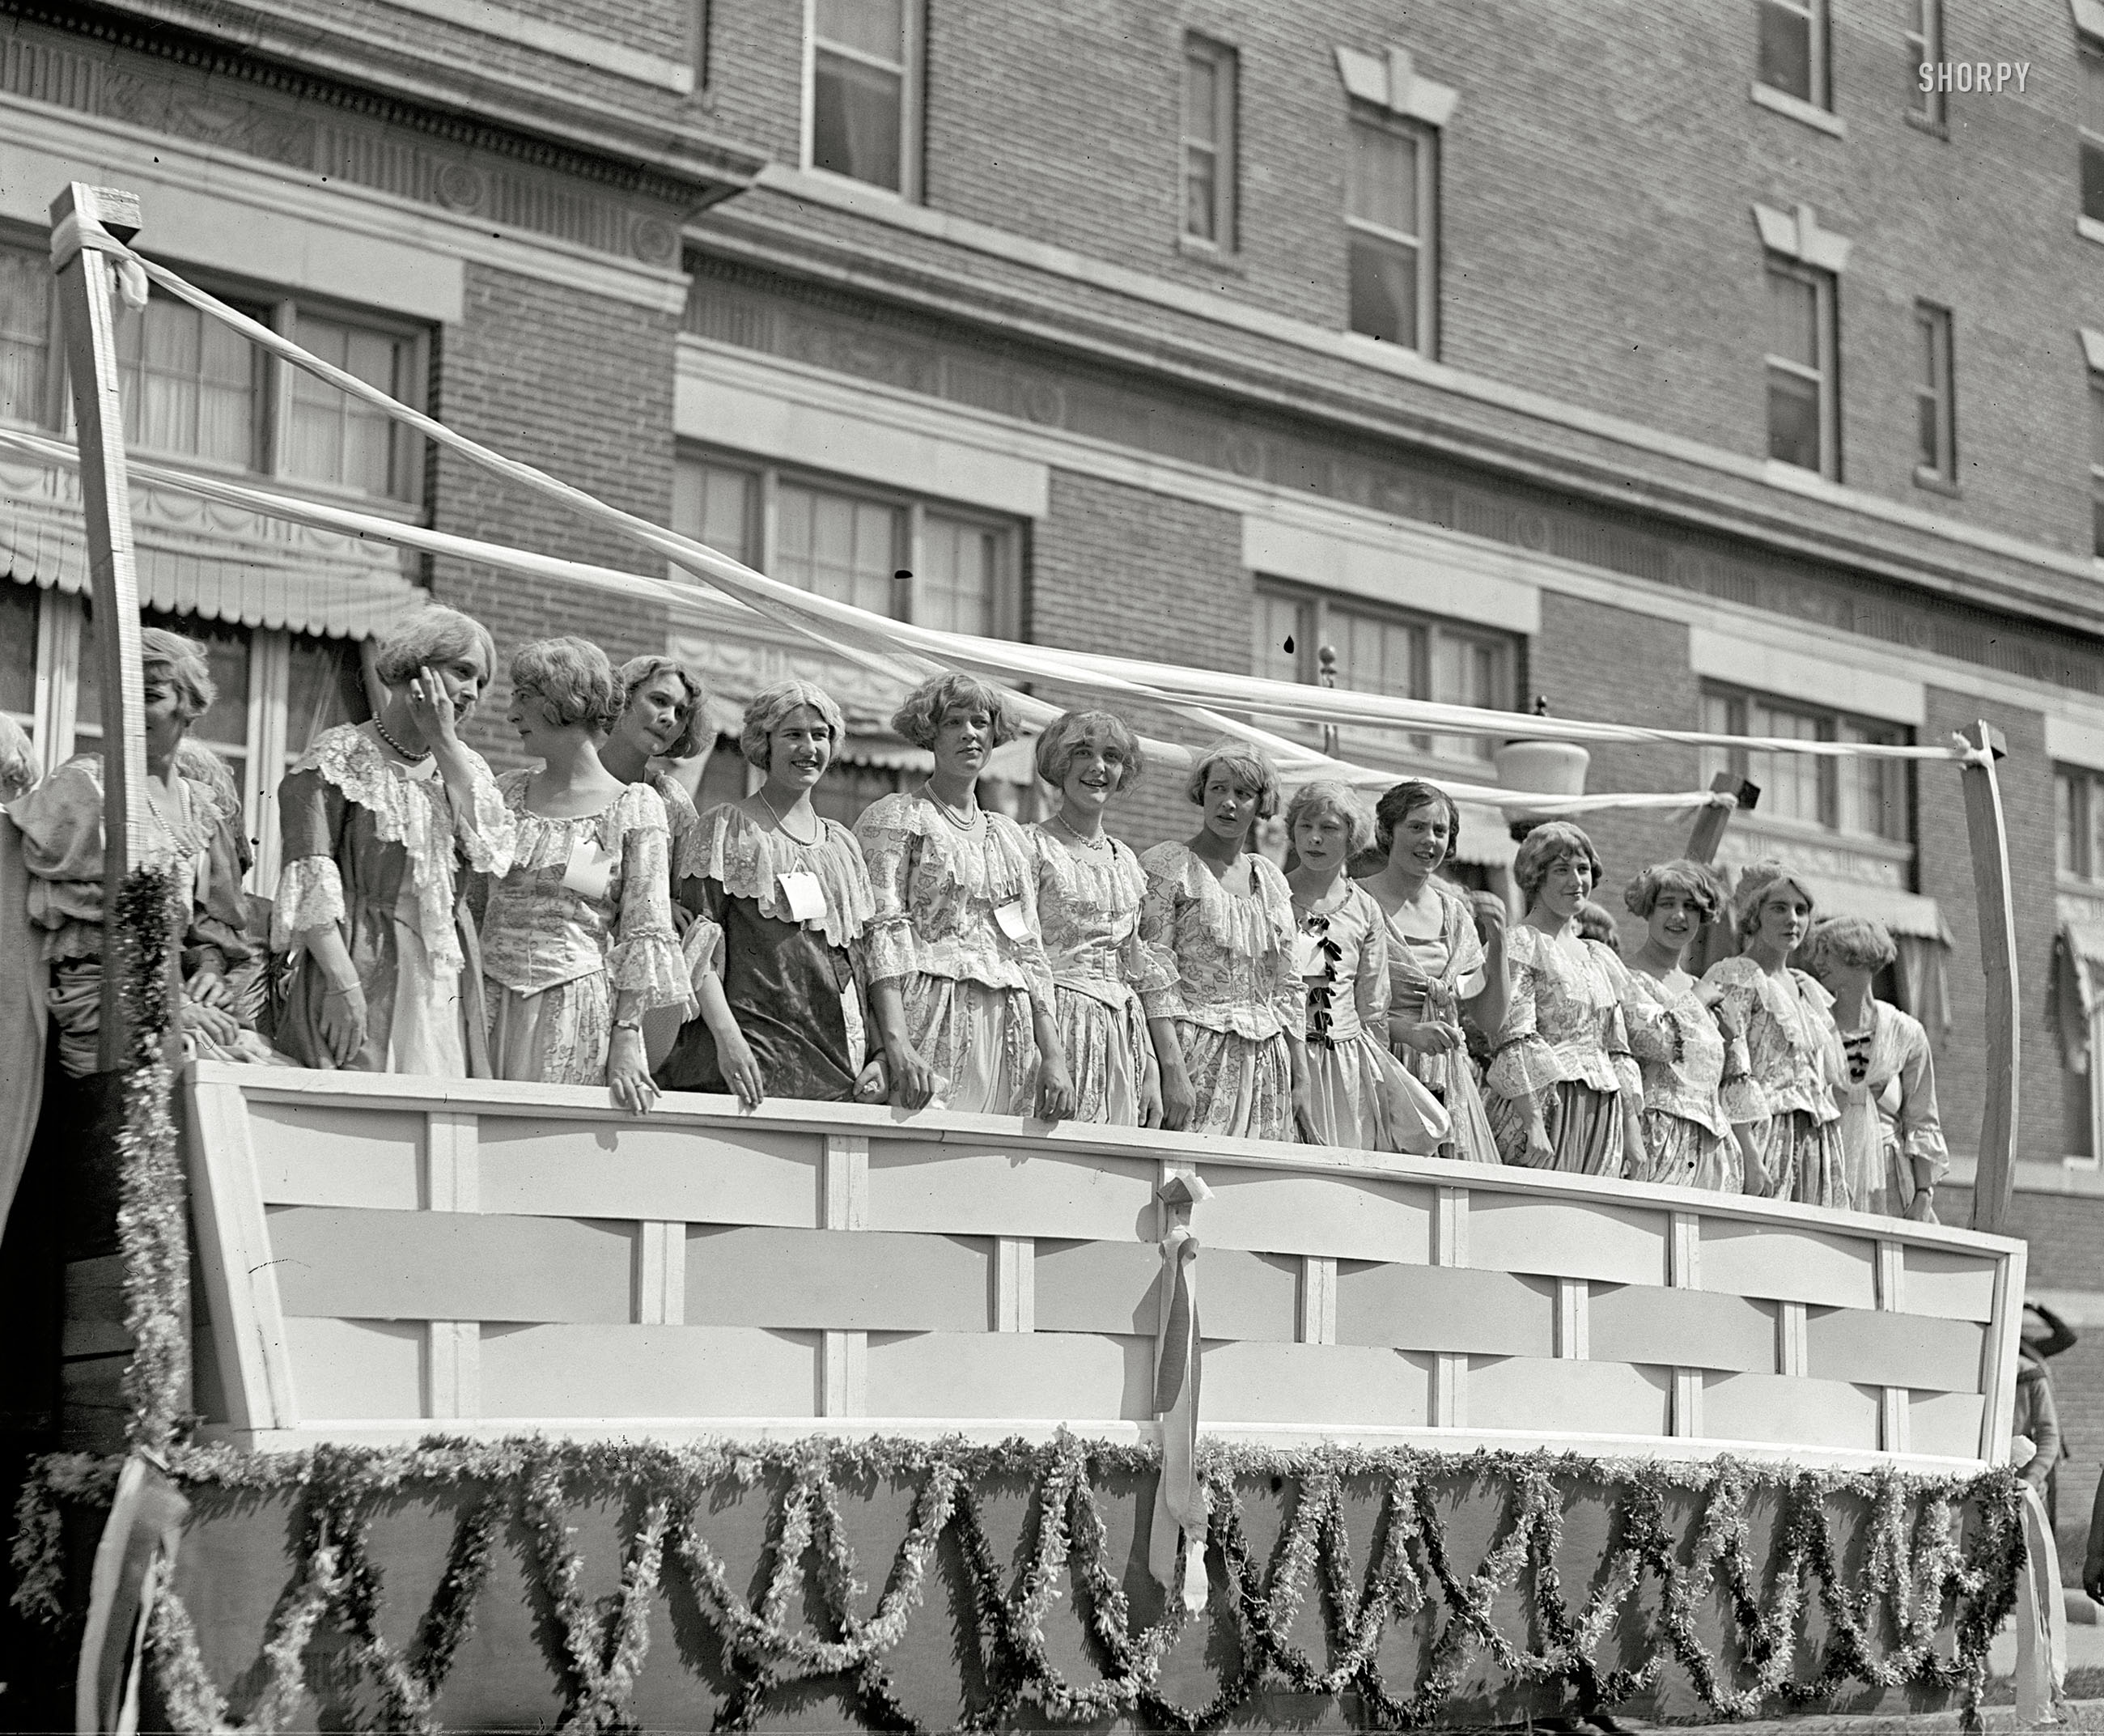 April 25, 1925. "Apple Blossom Festival, Winchester, Virginia." A freshly picked bevy of beauties. National Photo Company glass negative. View full size.